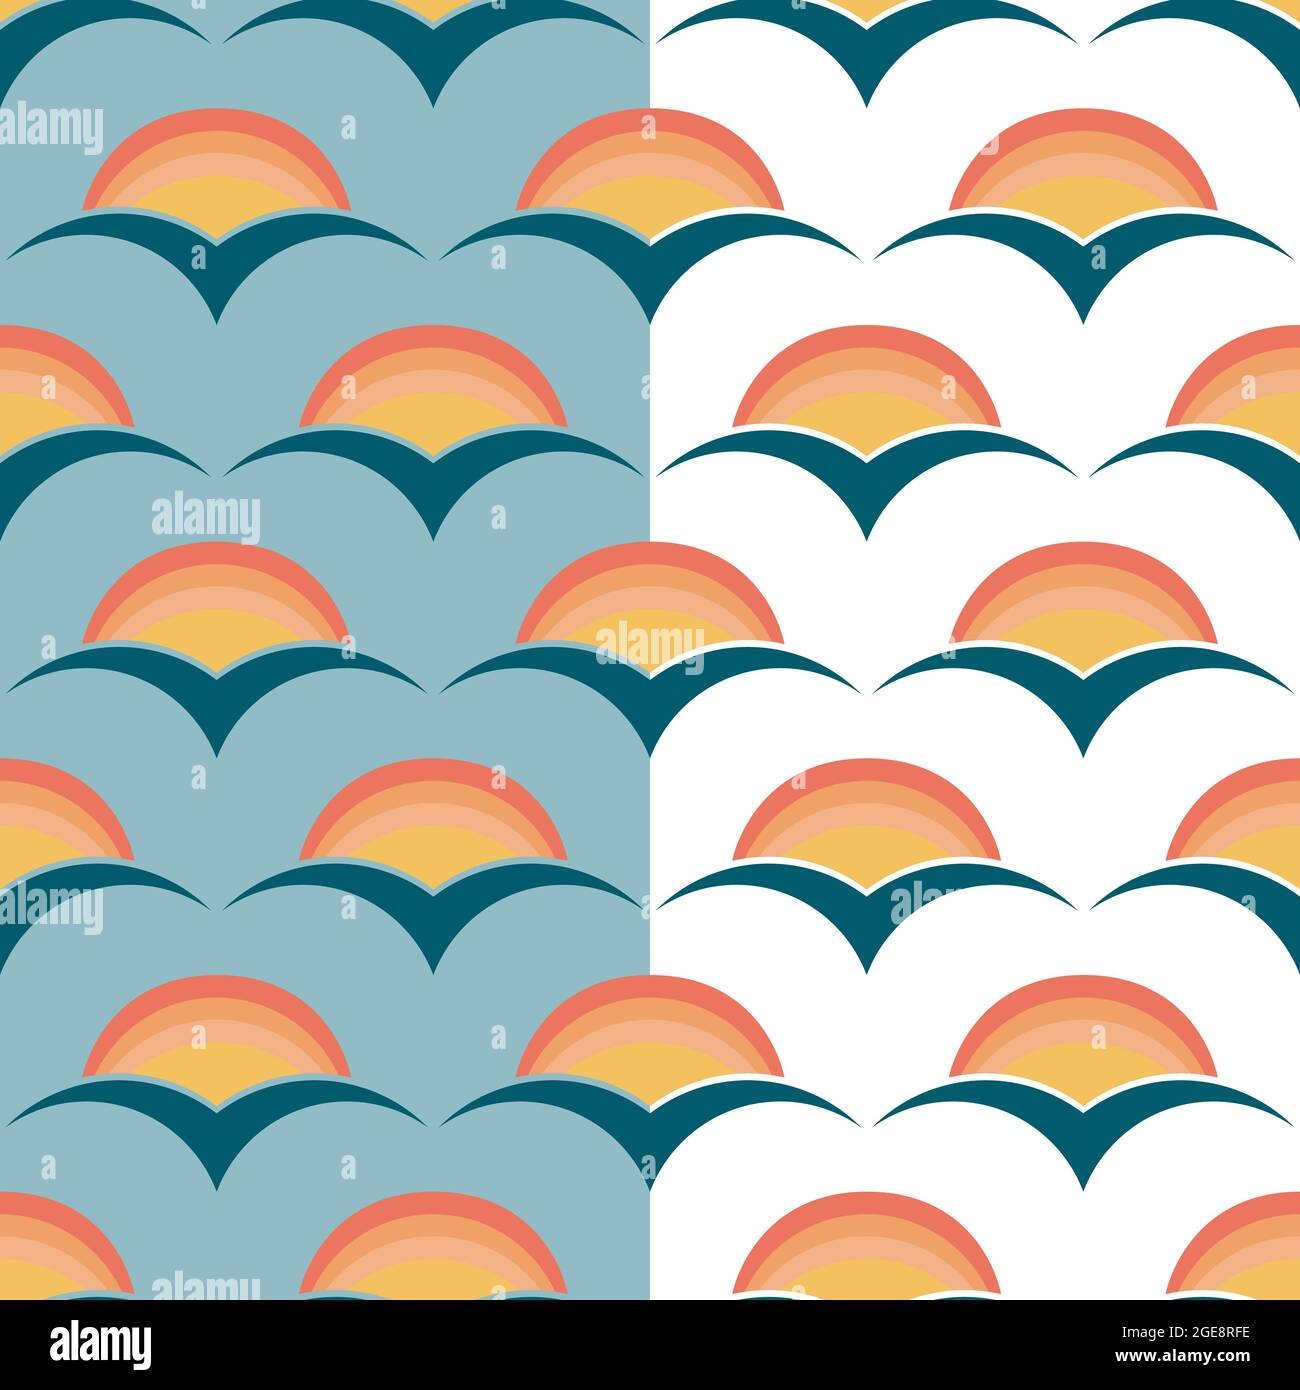 70s fashion style, rainbow sunset seamless pattern. Geometric half circle, stylized seagal shapes. Warm red yellow palette. Blue, white easy editable Stock Vector